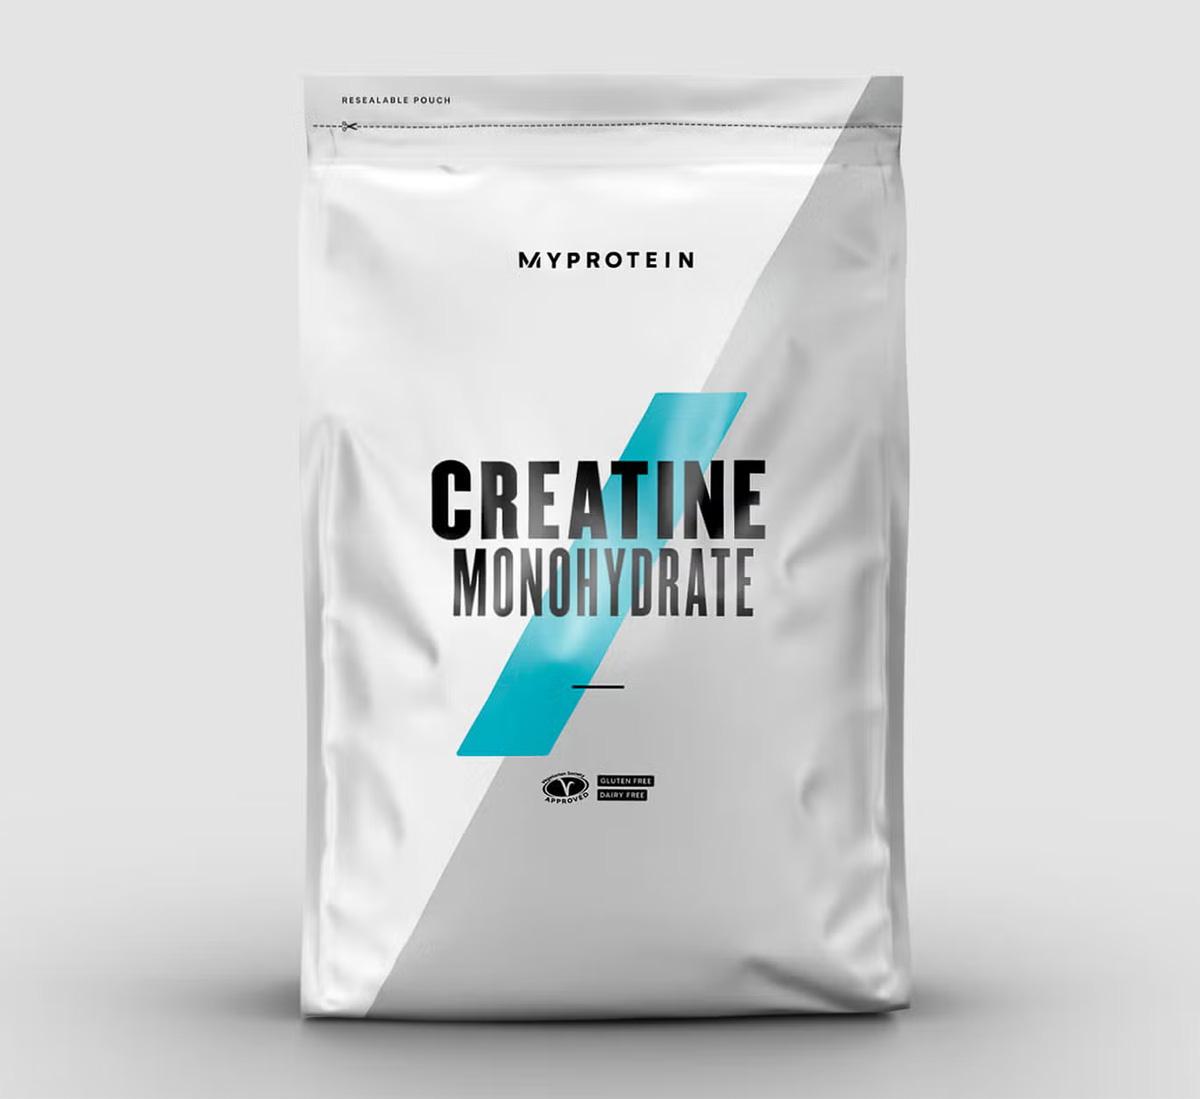 Myprotein Creatine Monohydrate Powder 2.2lbs for $25.99 Shipped